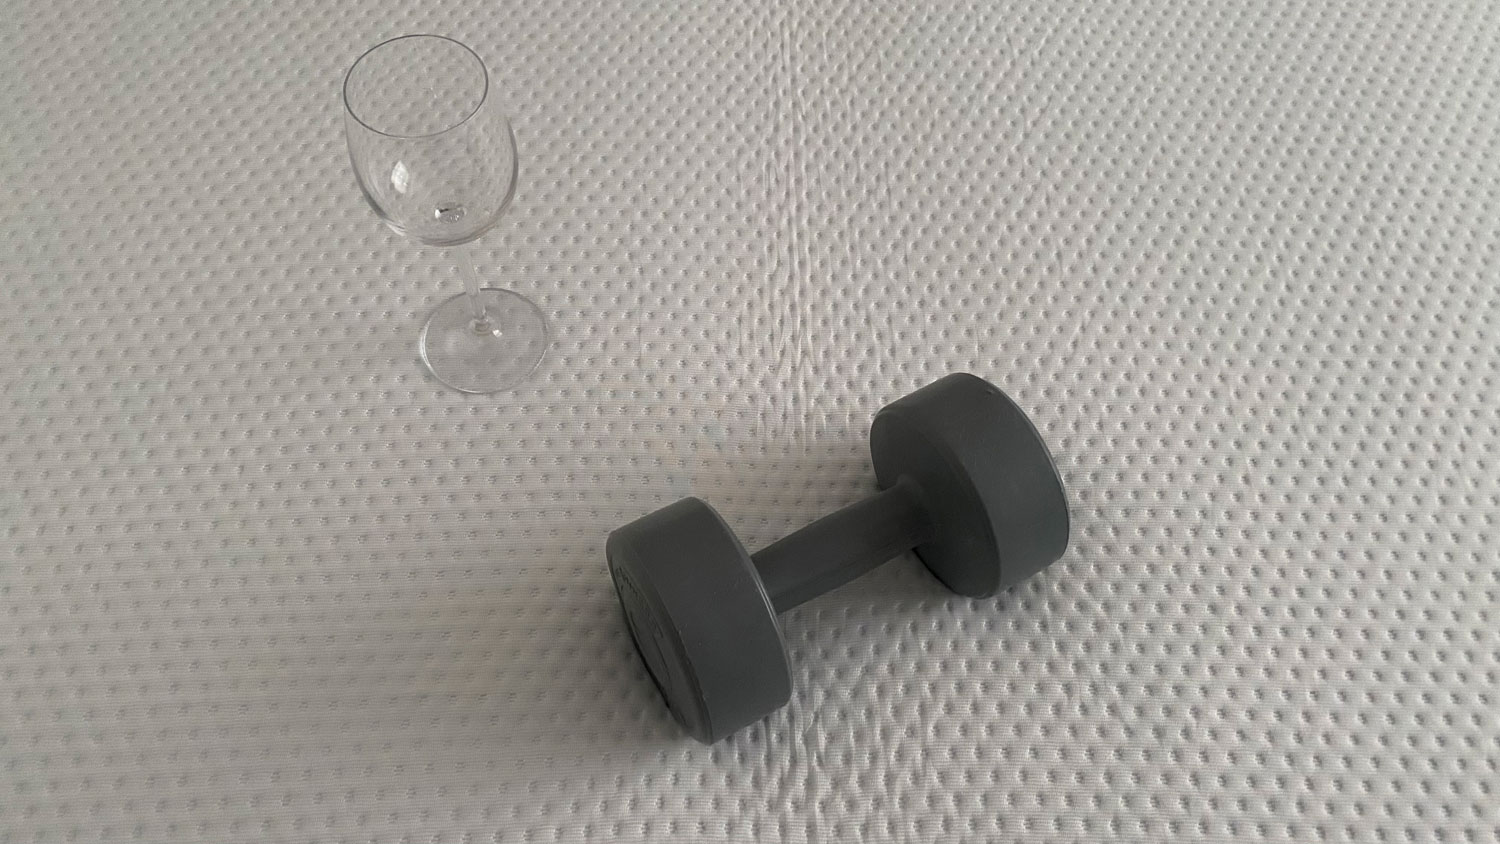 A wine glass and a weight on the Emma Premium mattress